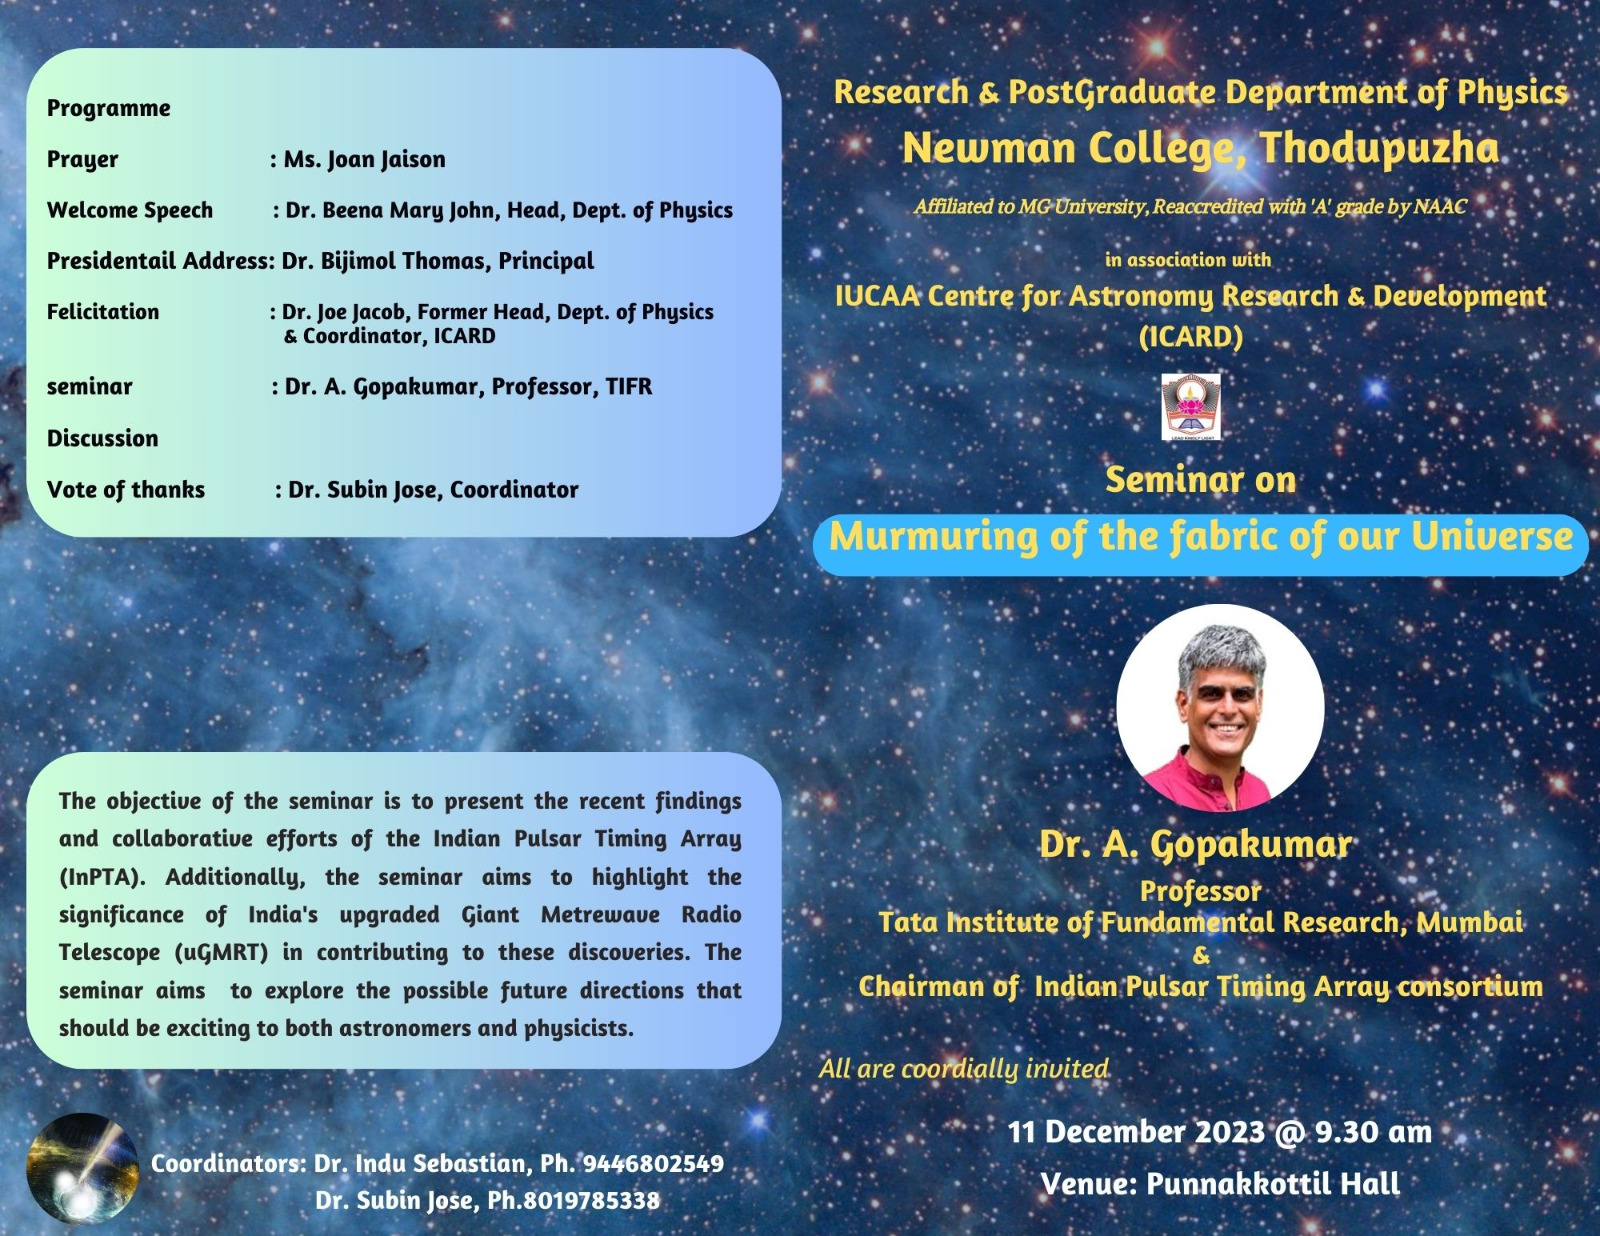 Seminar on the Murmuring of the Fabric of Our Universe